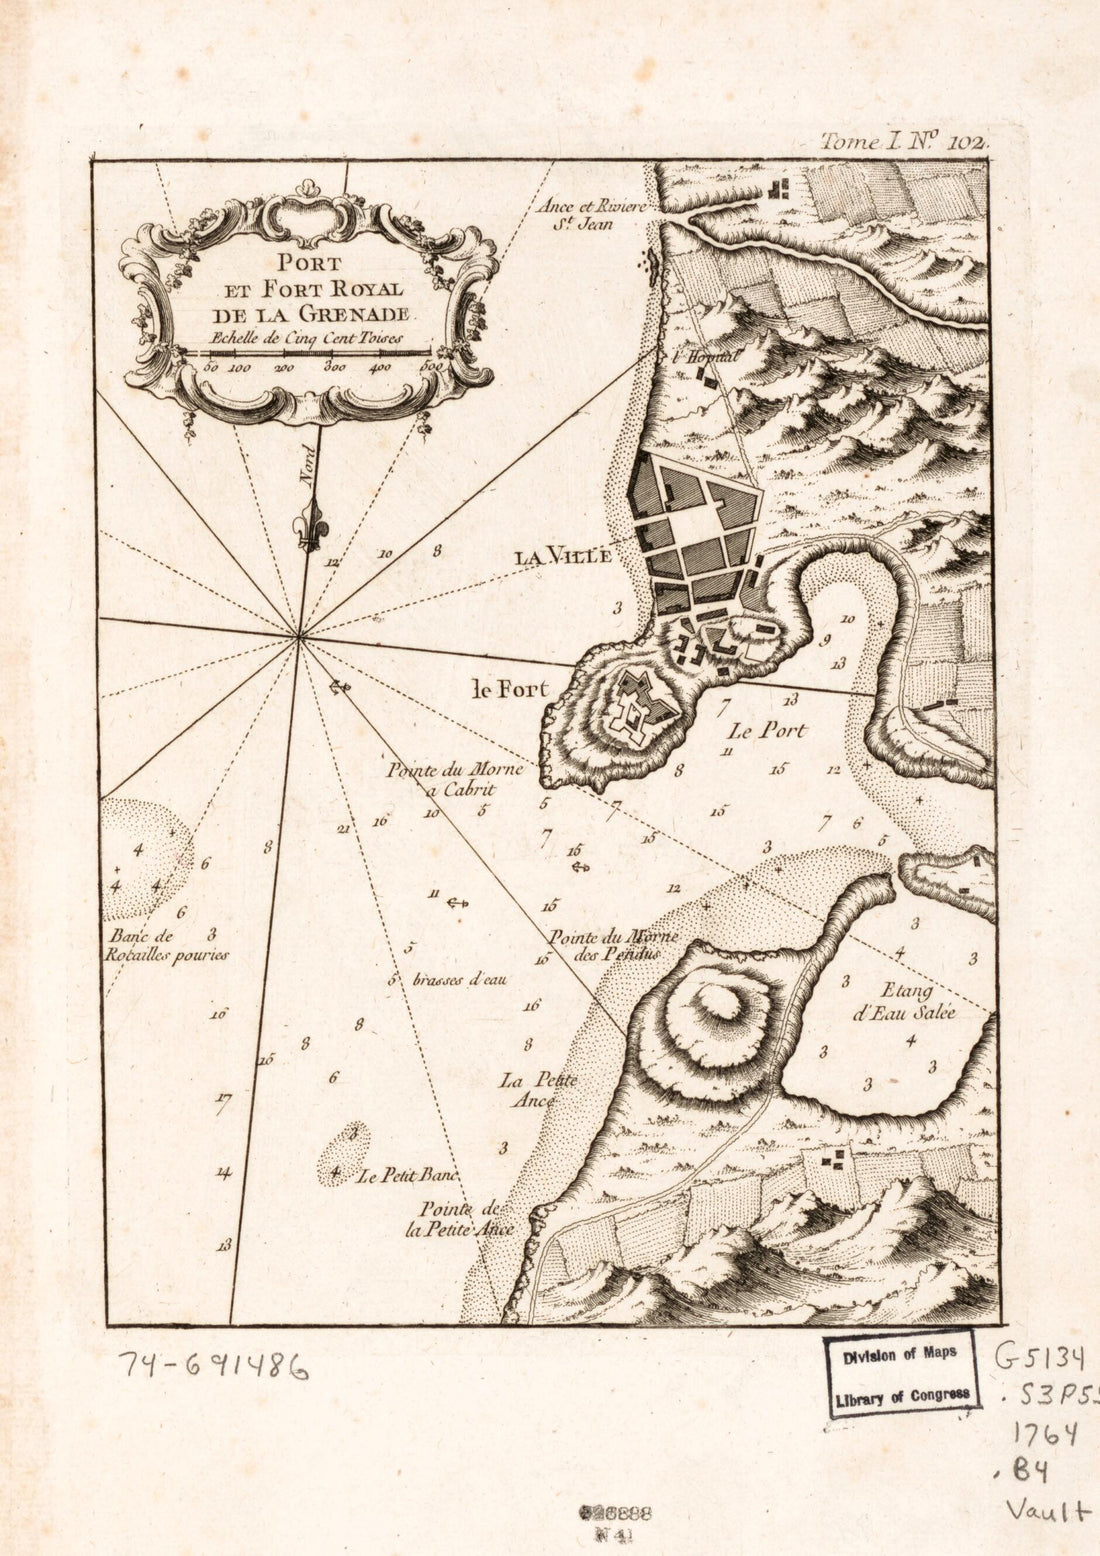 This old map of Port Et Fort Royal De La Grenade from 1764 was created by Jacques Nicolas] [Bellin in 1764